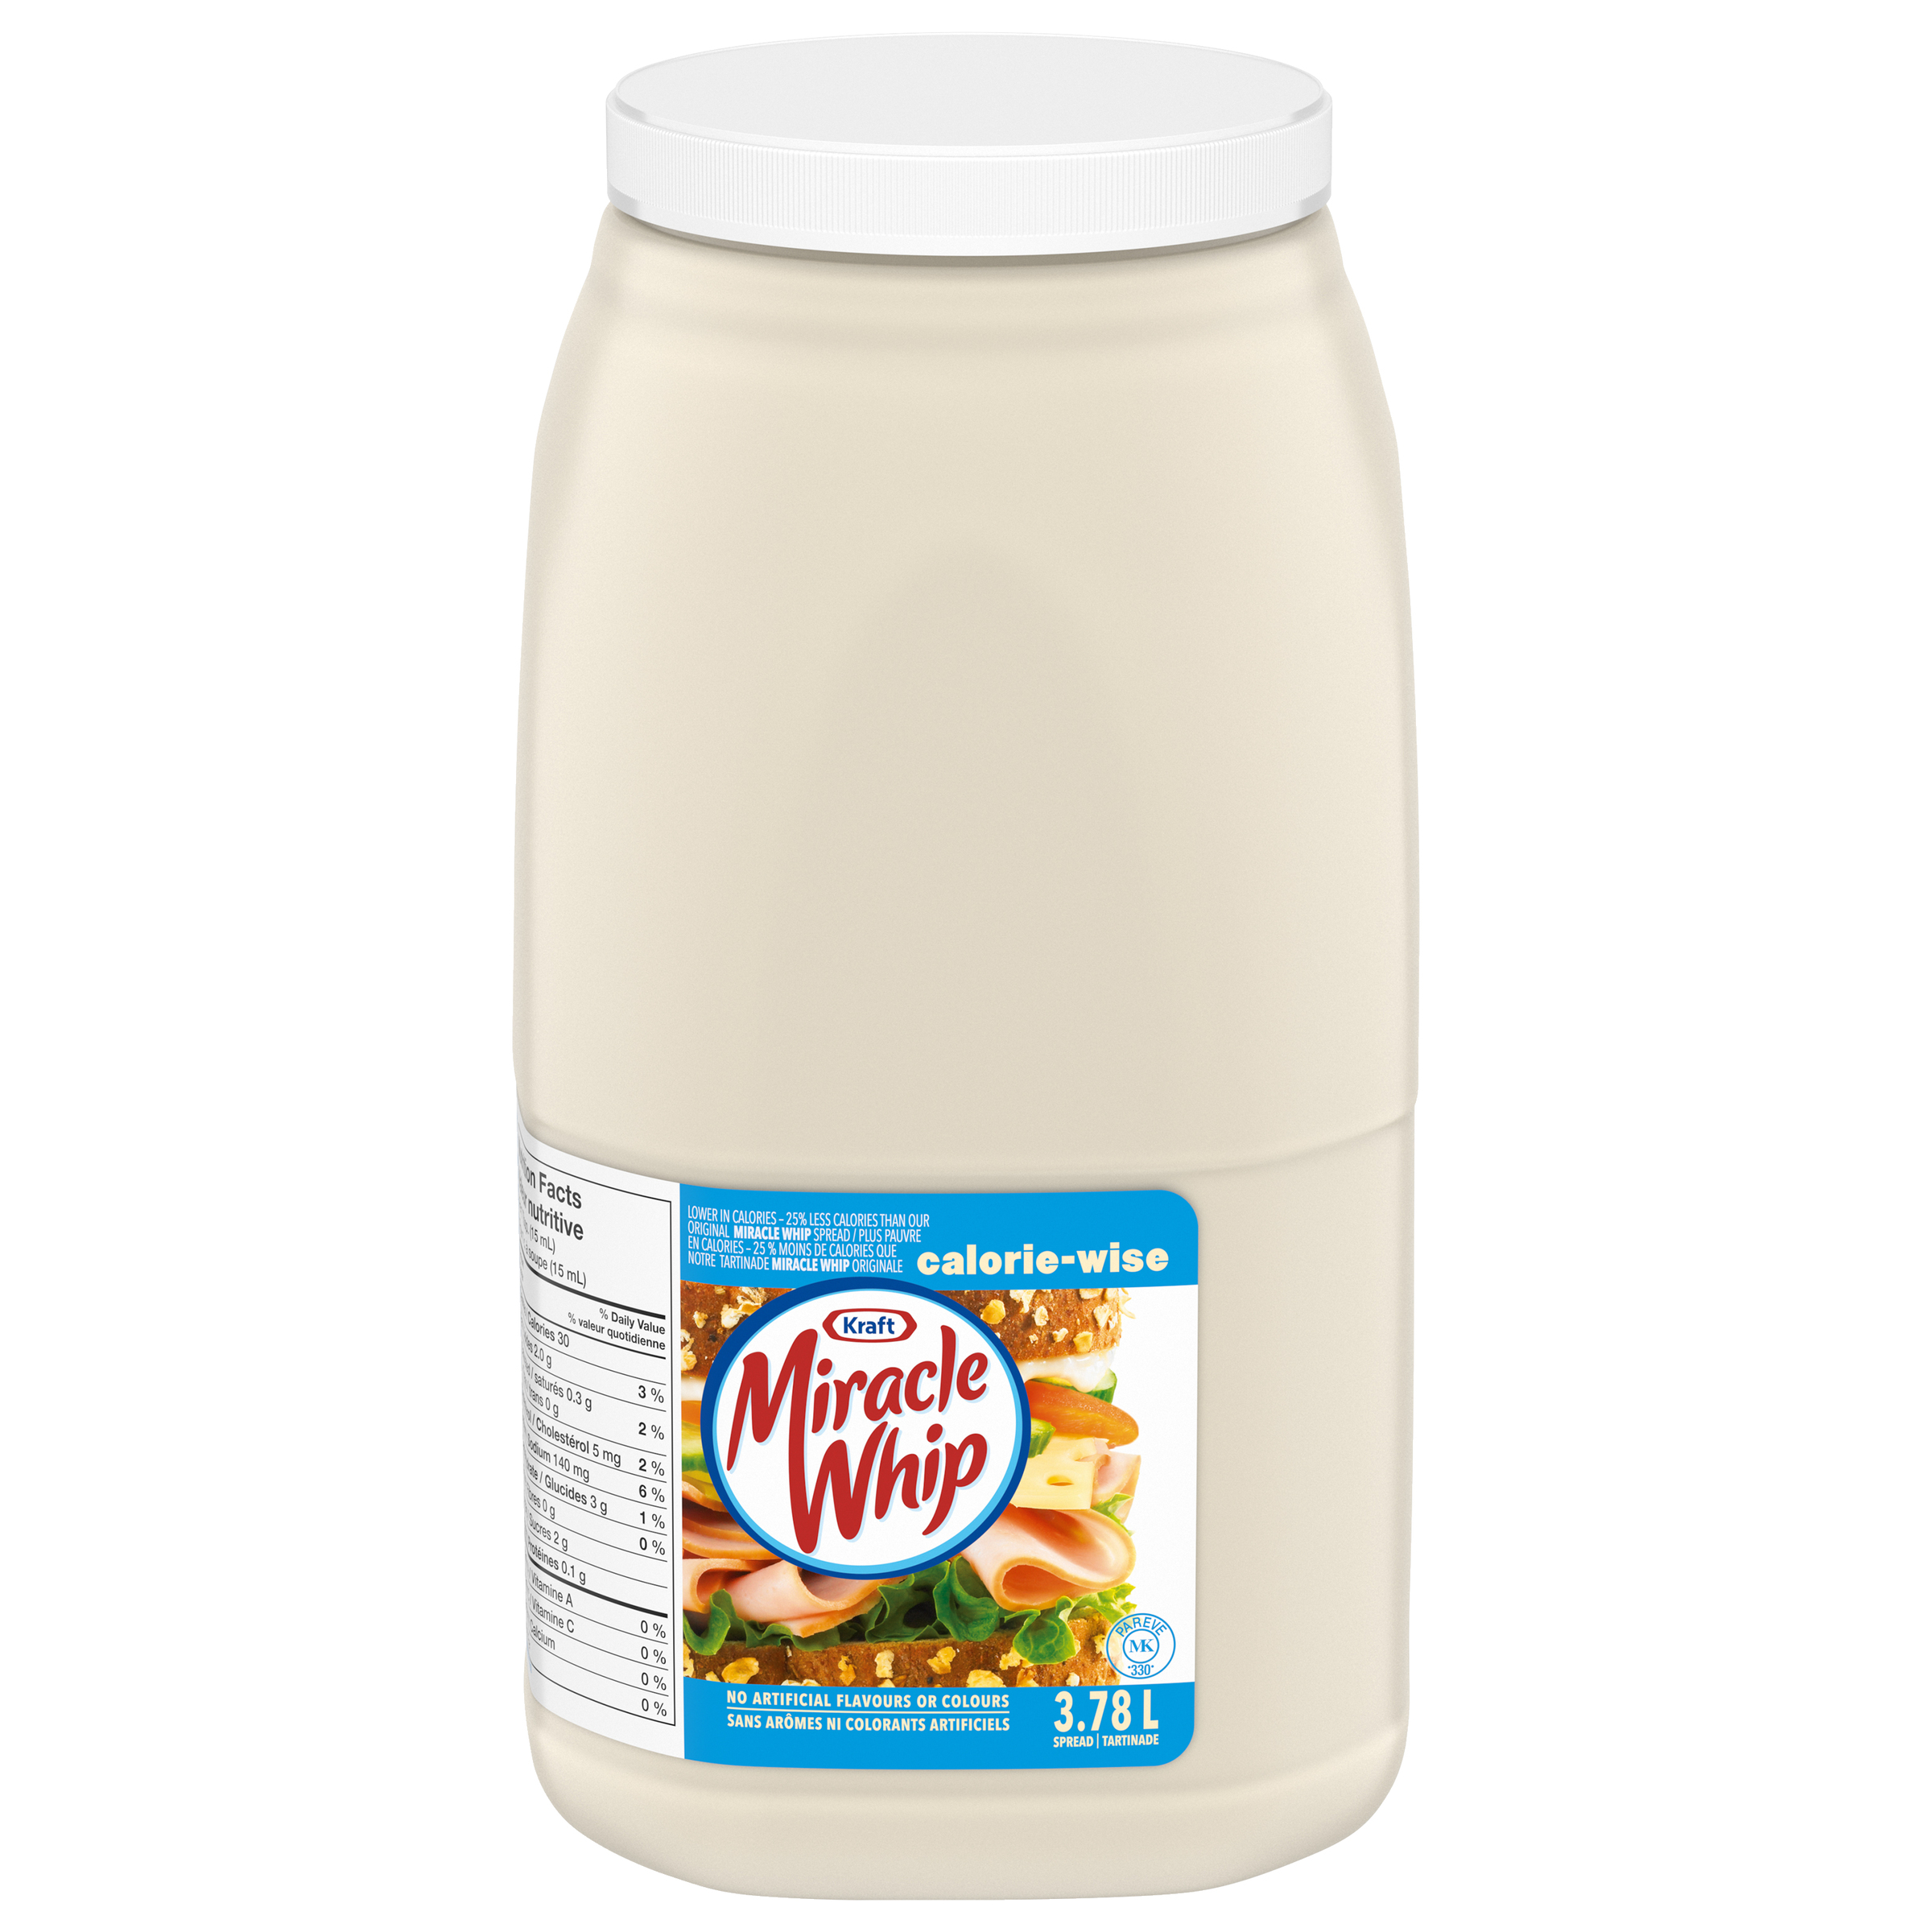 KRAFT MIRACLE WHIP Calorie Wise Pail 3.78L 2